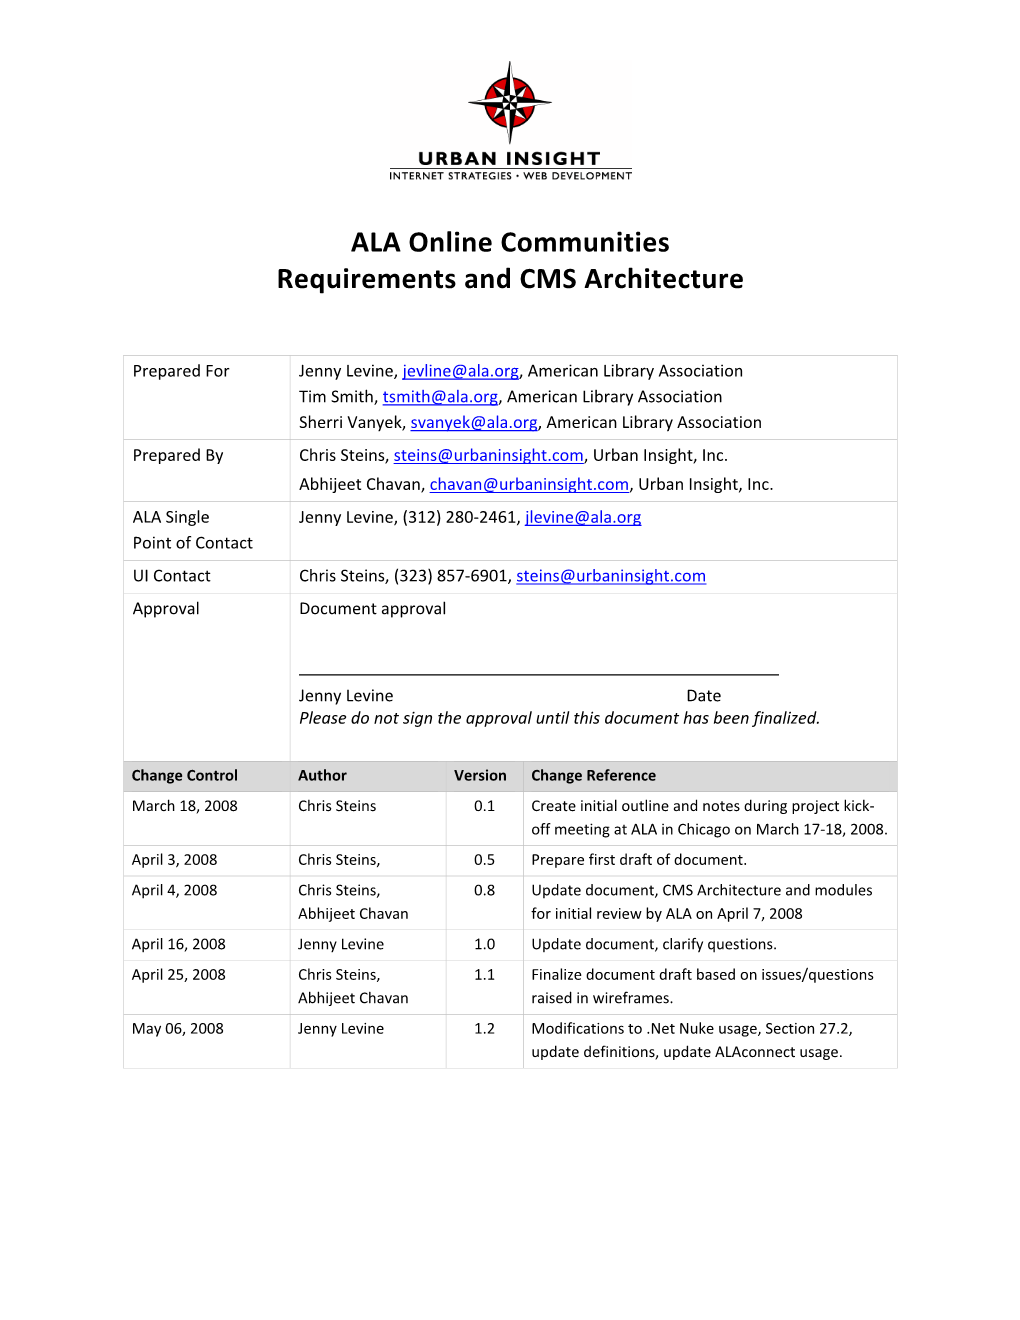 ALA Online Communities Requirements and CMS Architecture